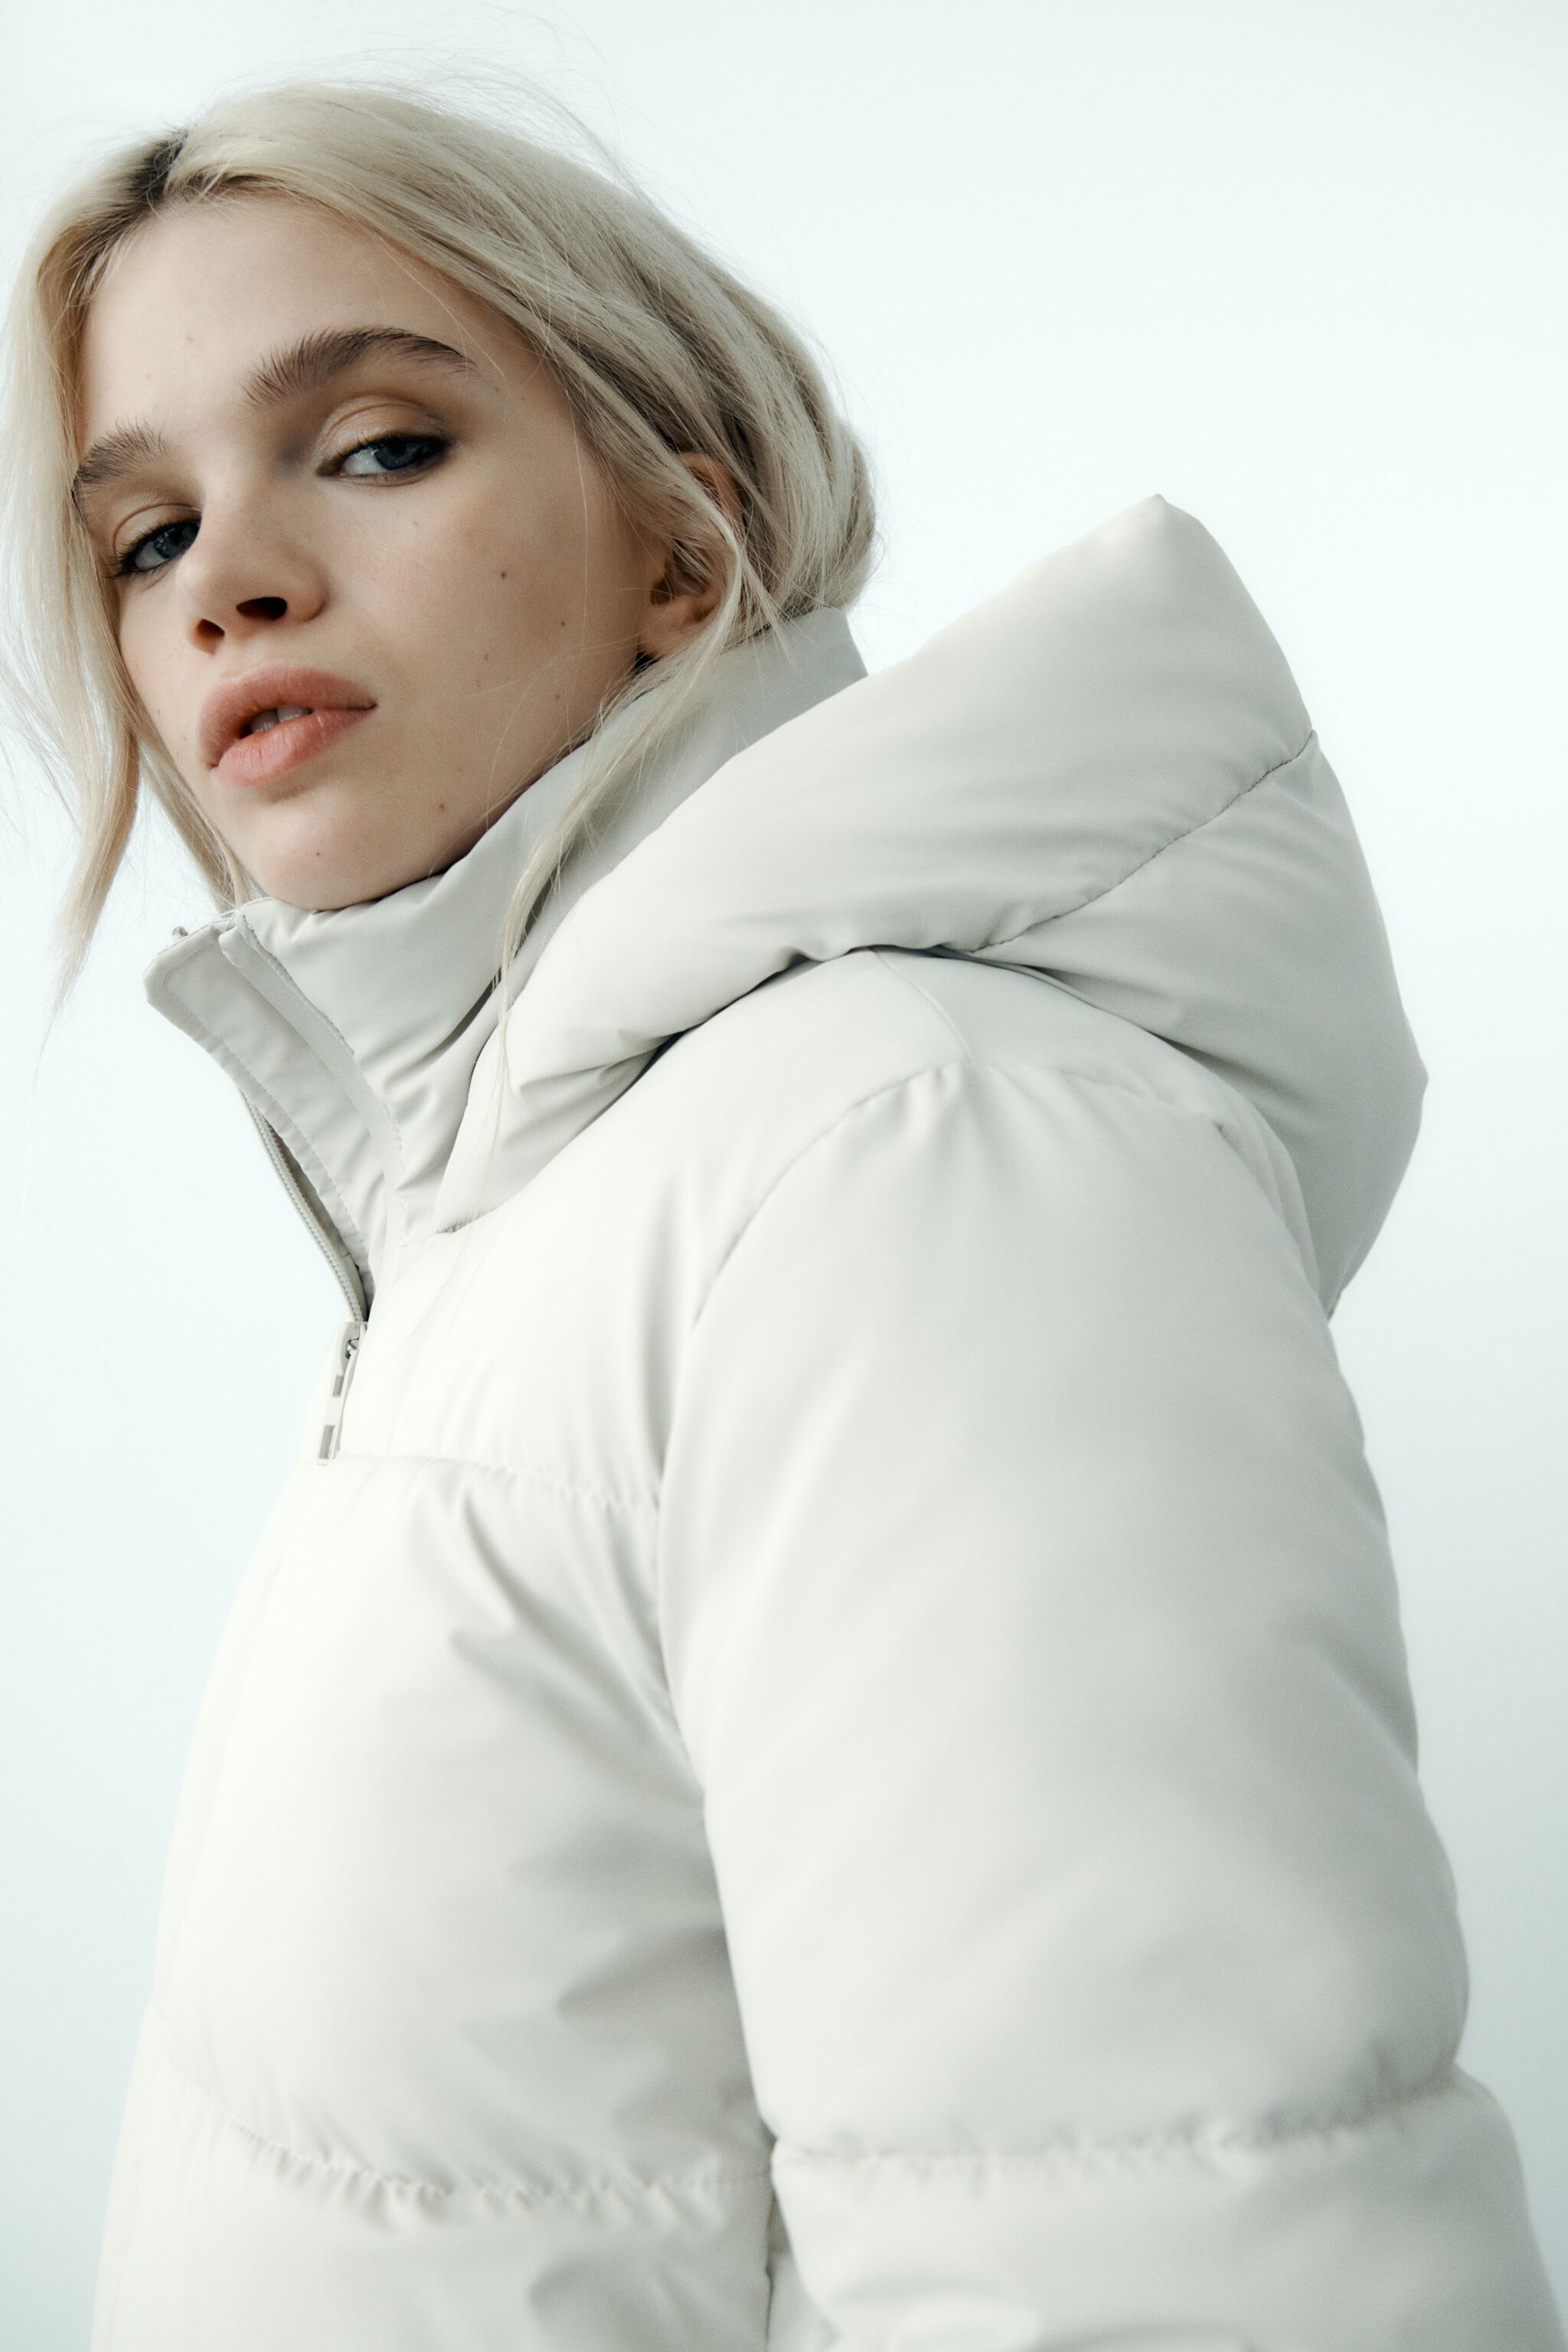 WIND PROTECTION QUILTED ANORAK